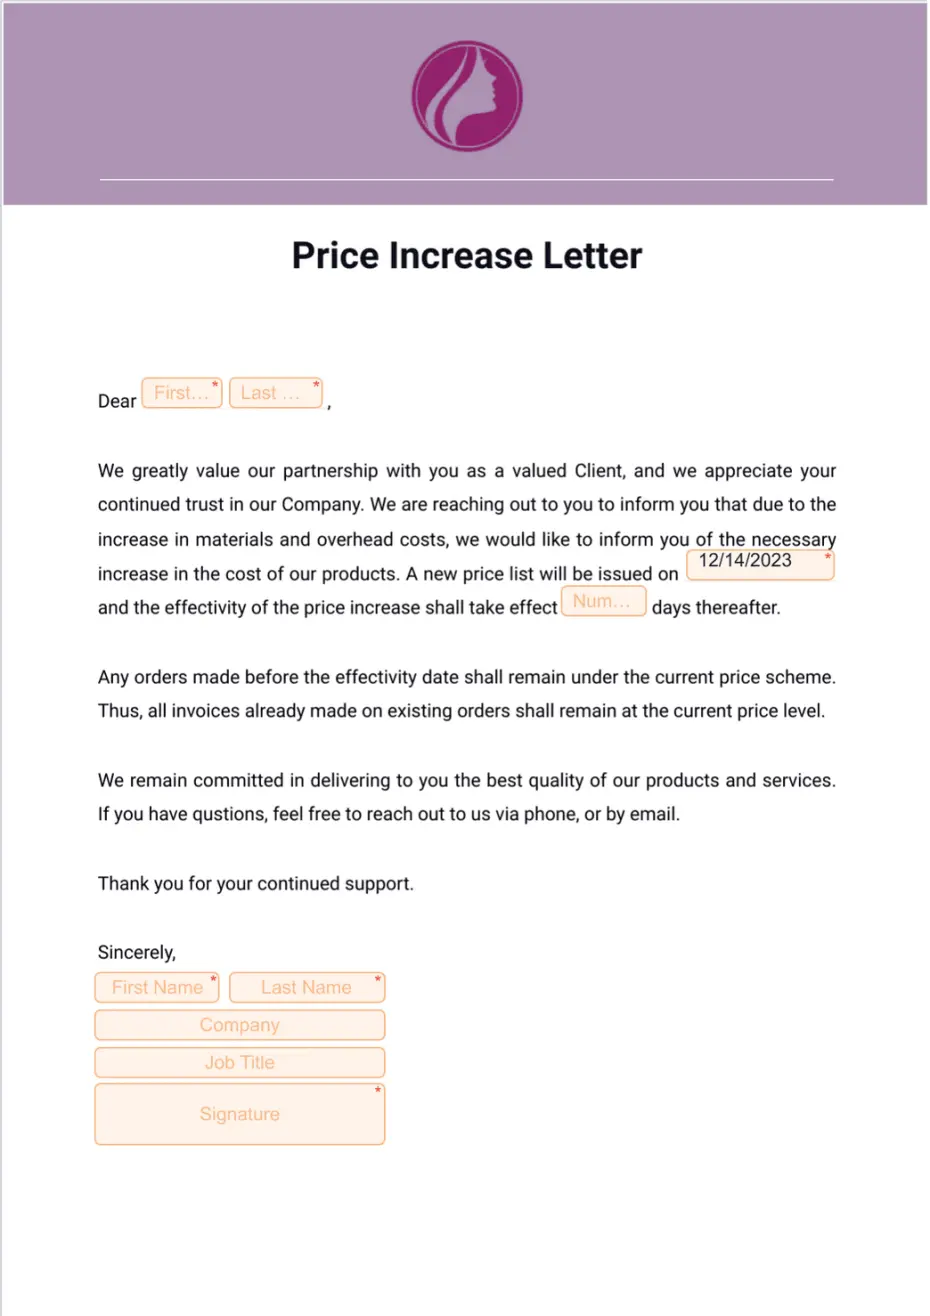 Price Increase Letter